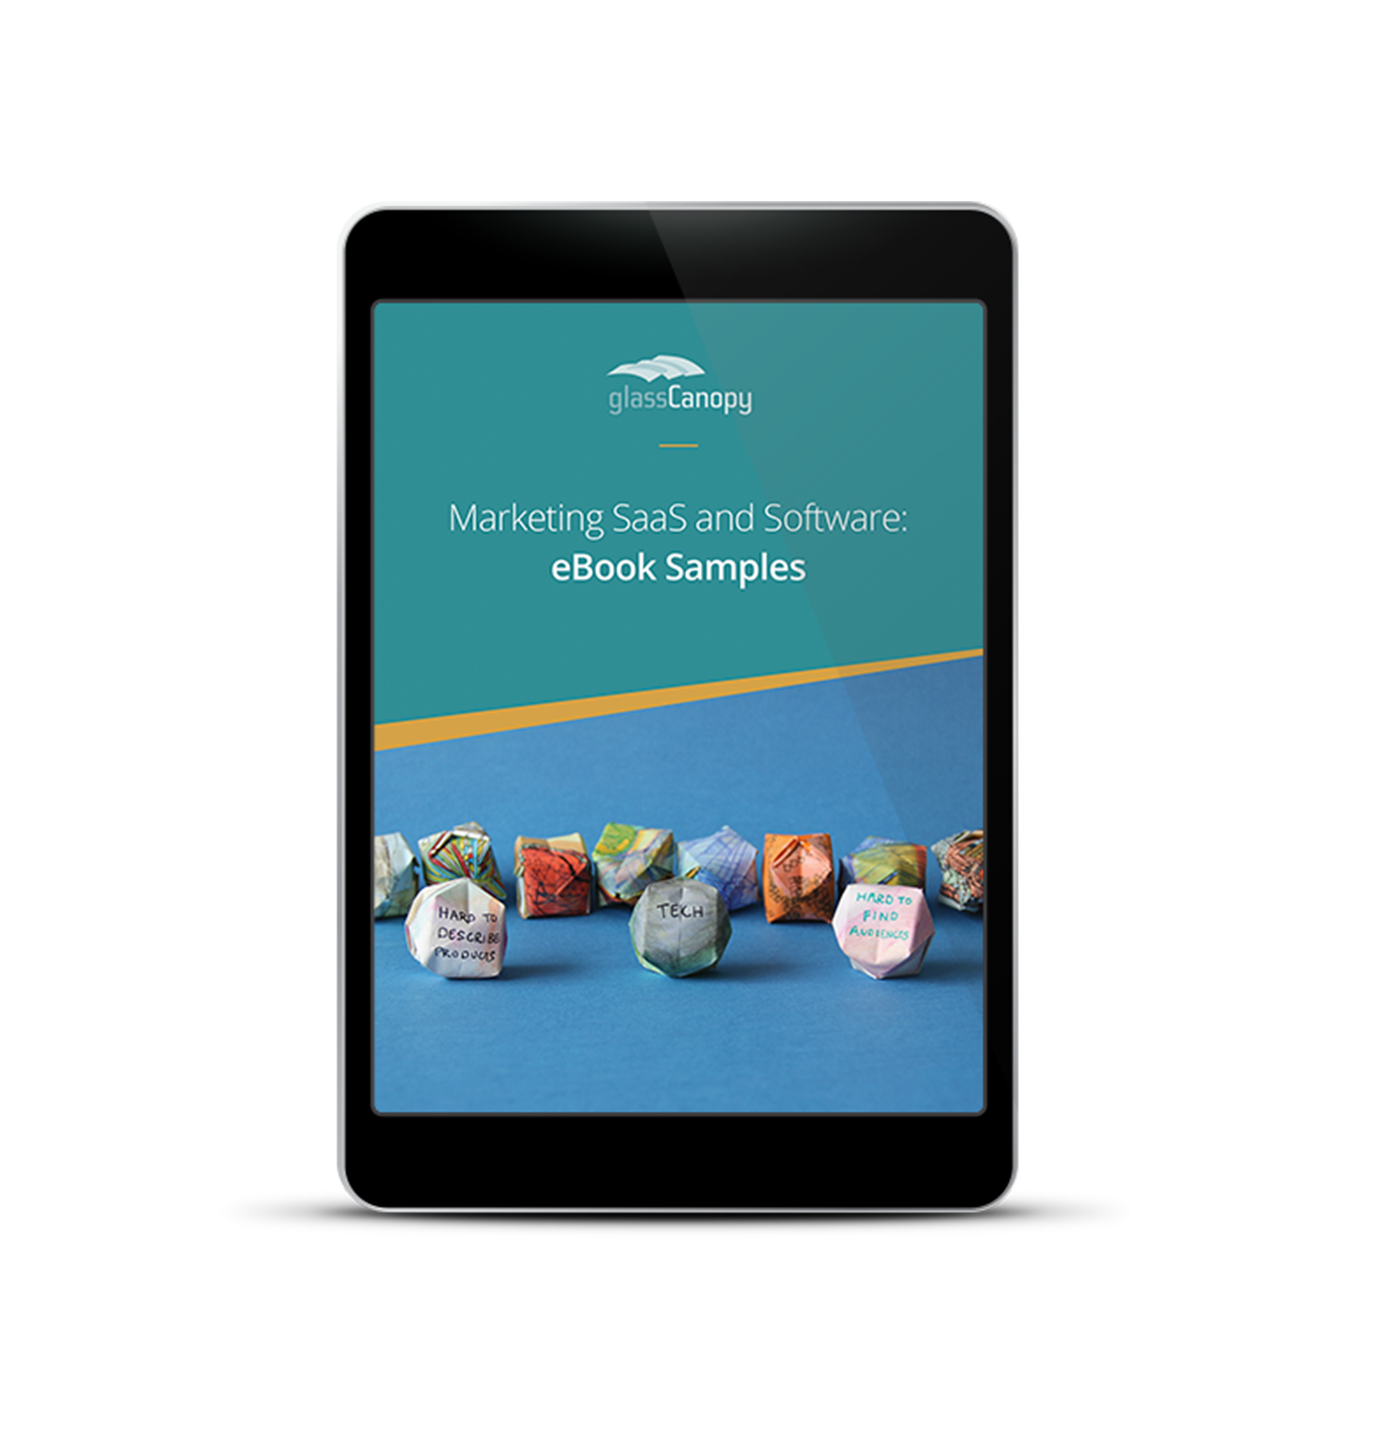 eBook Samples for Marketing SaaS and Software